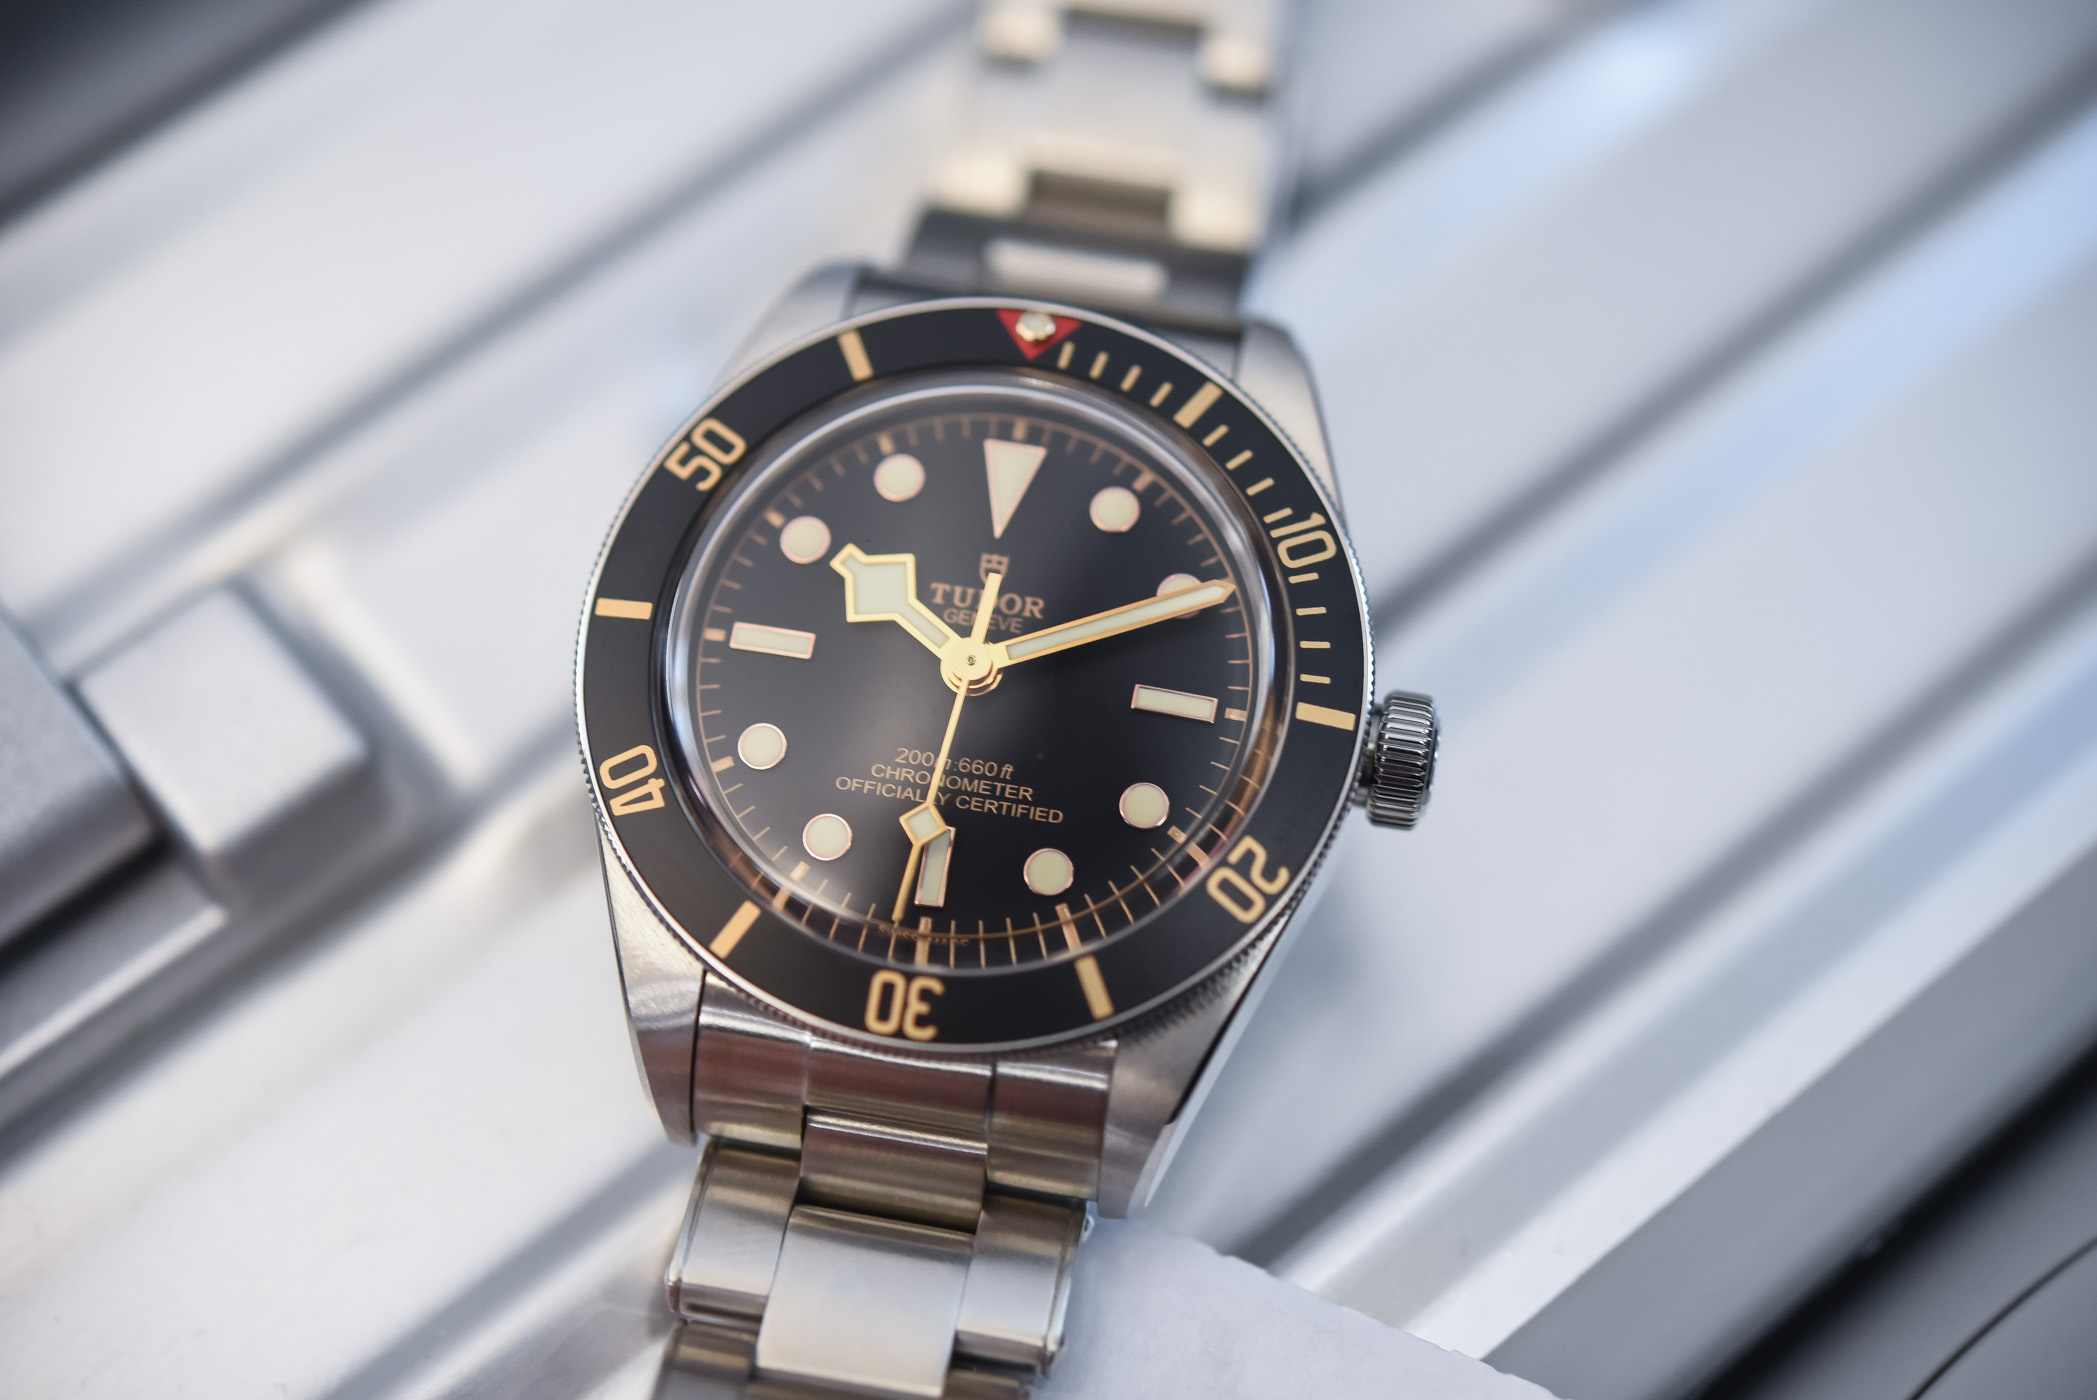 Best Dive Watches Baselworld 2018 - TUDOR BLACK BAY FIFTY-EIGHT 79030N